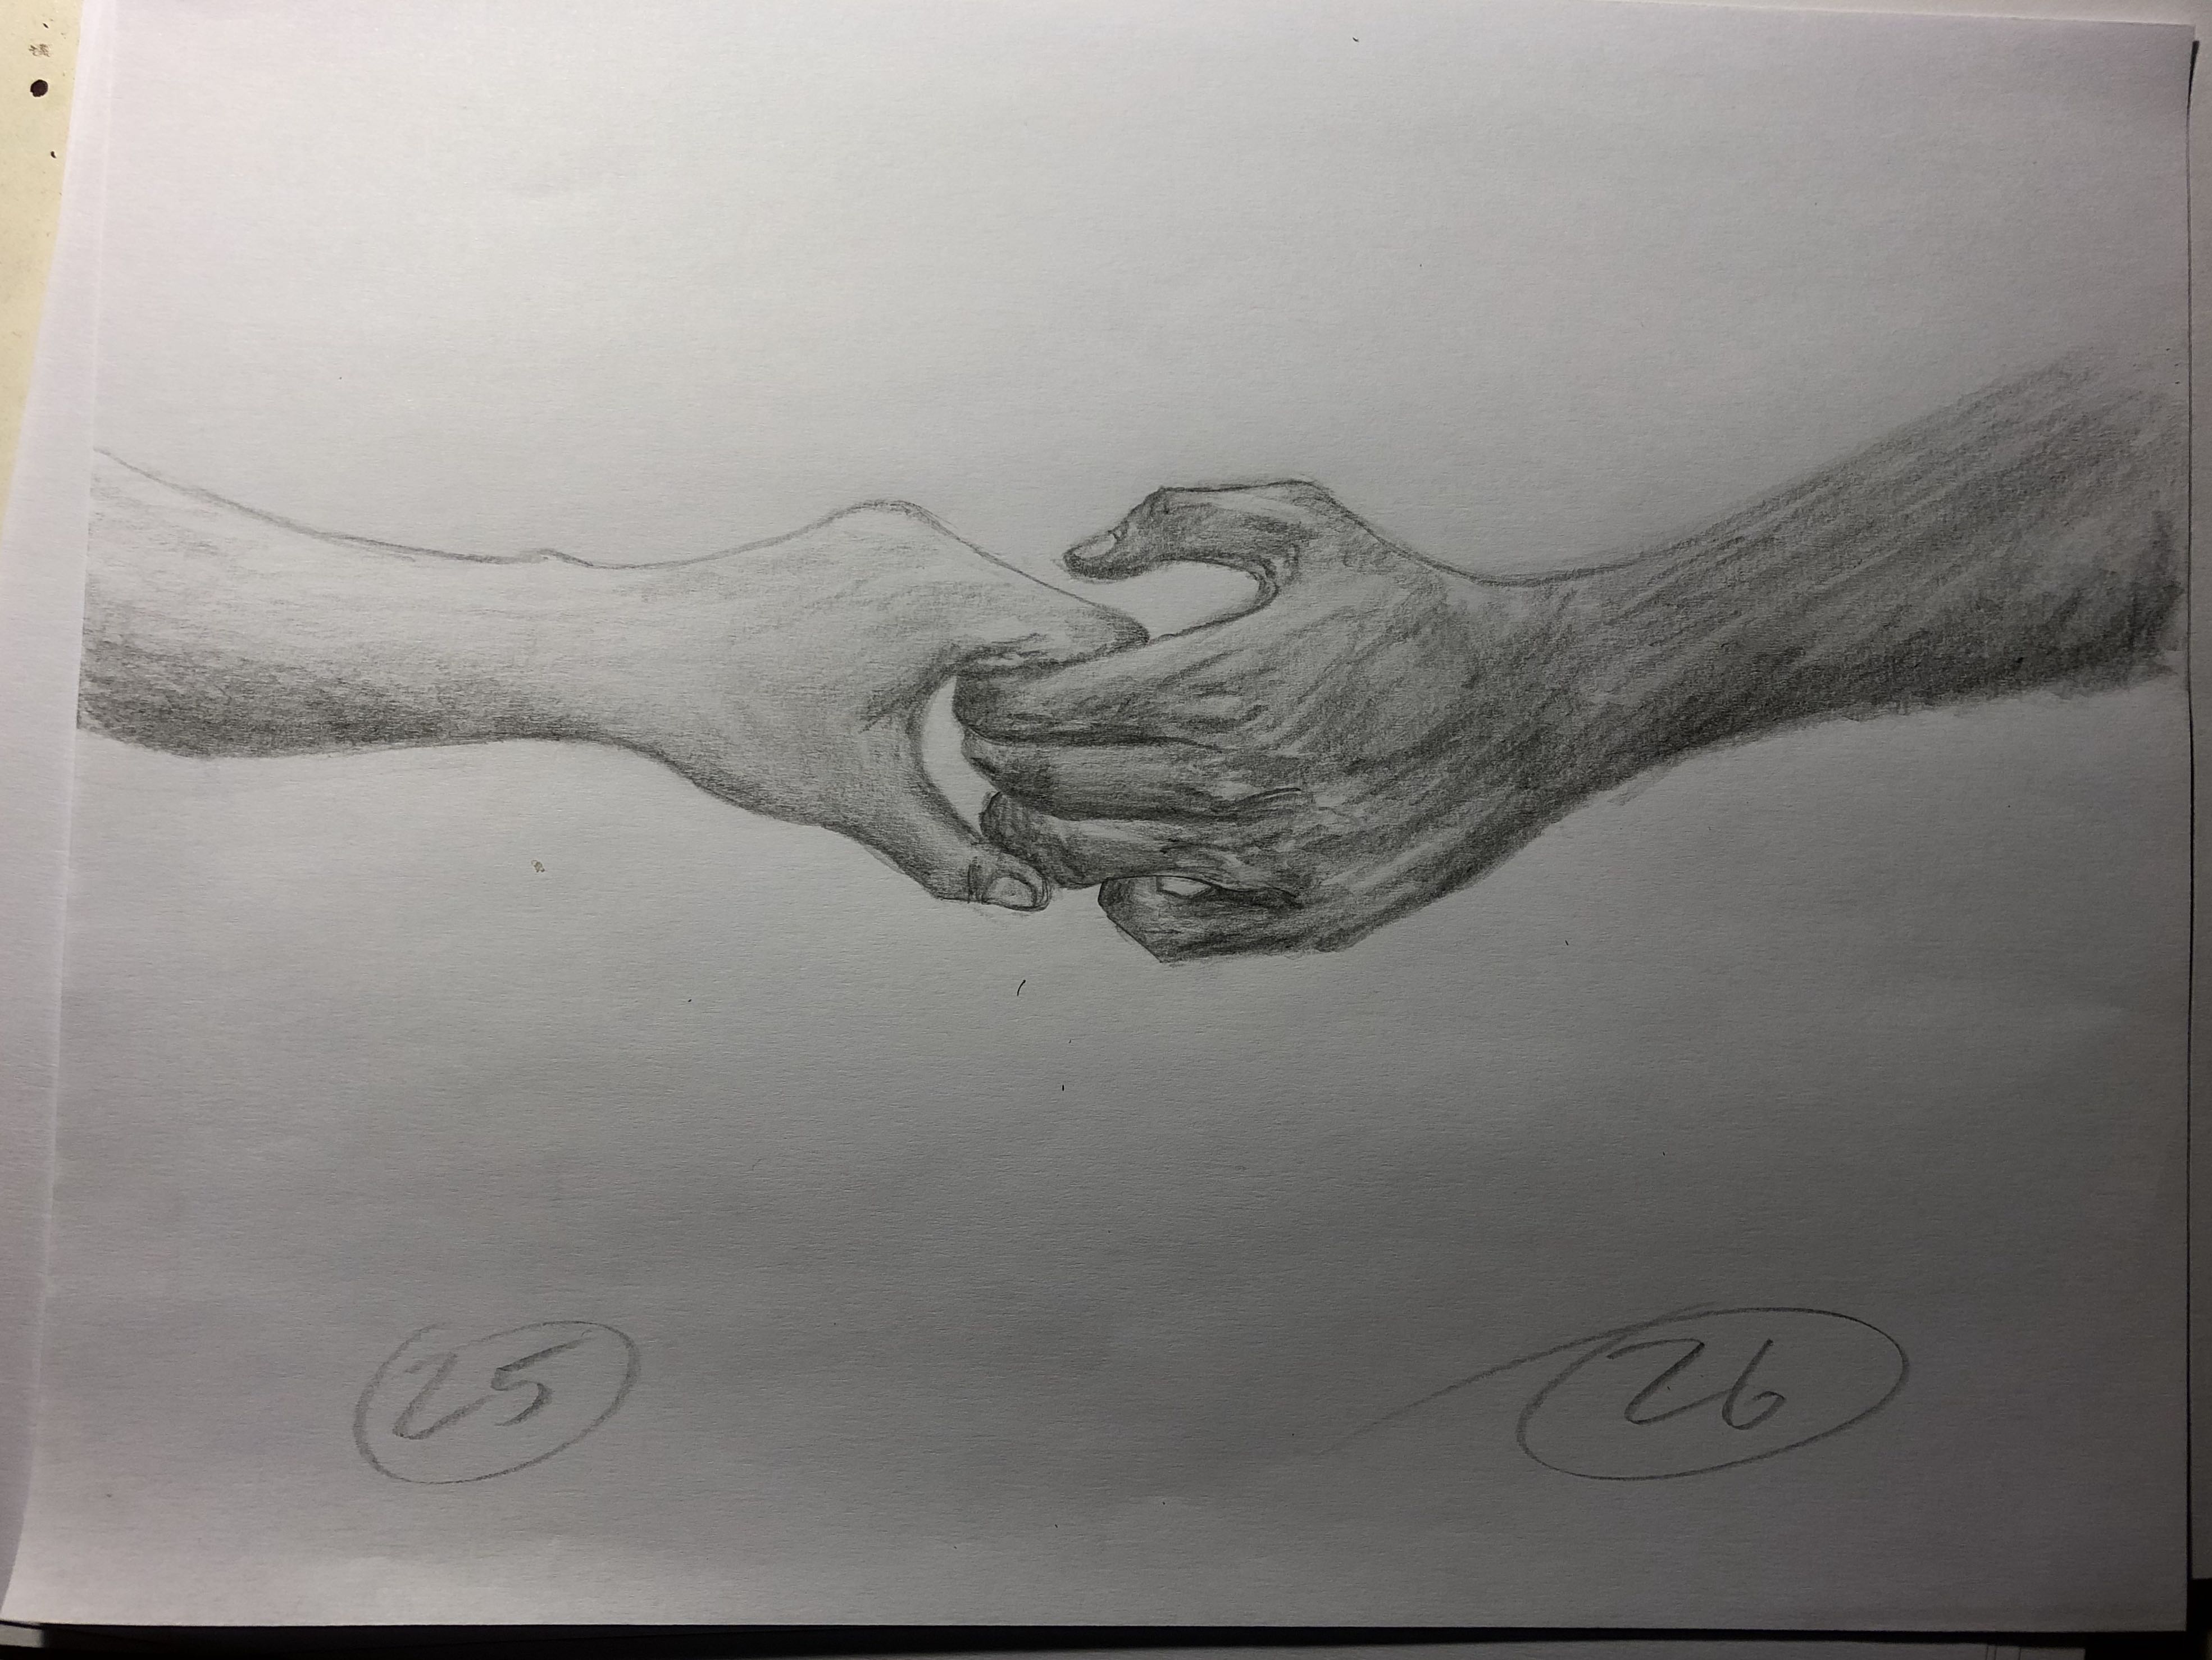 Creative Sketch Of A Hand Drawing with Pencil